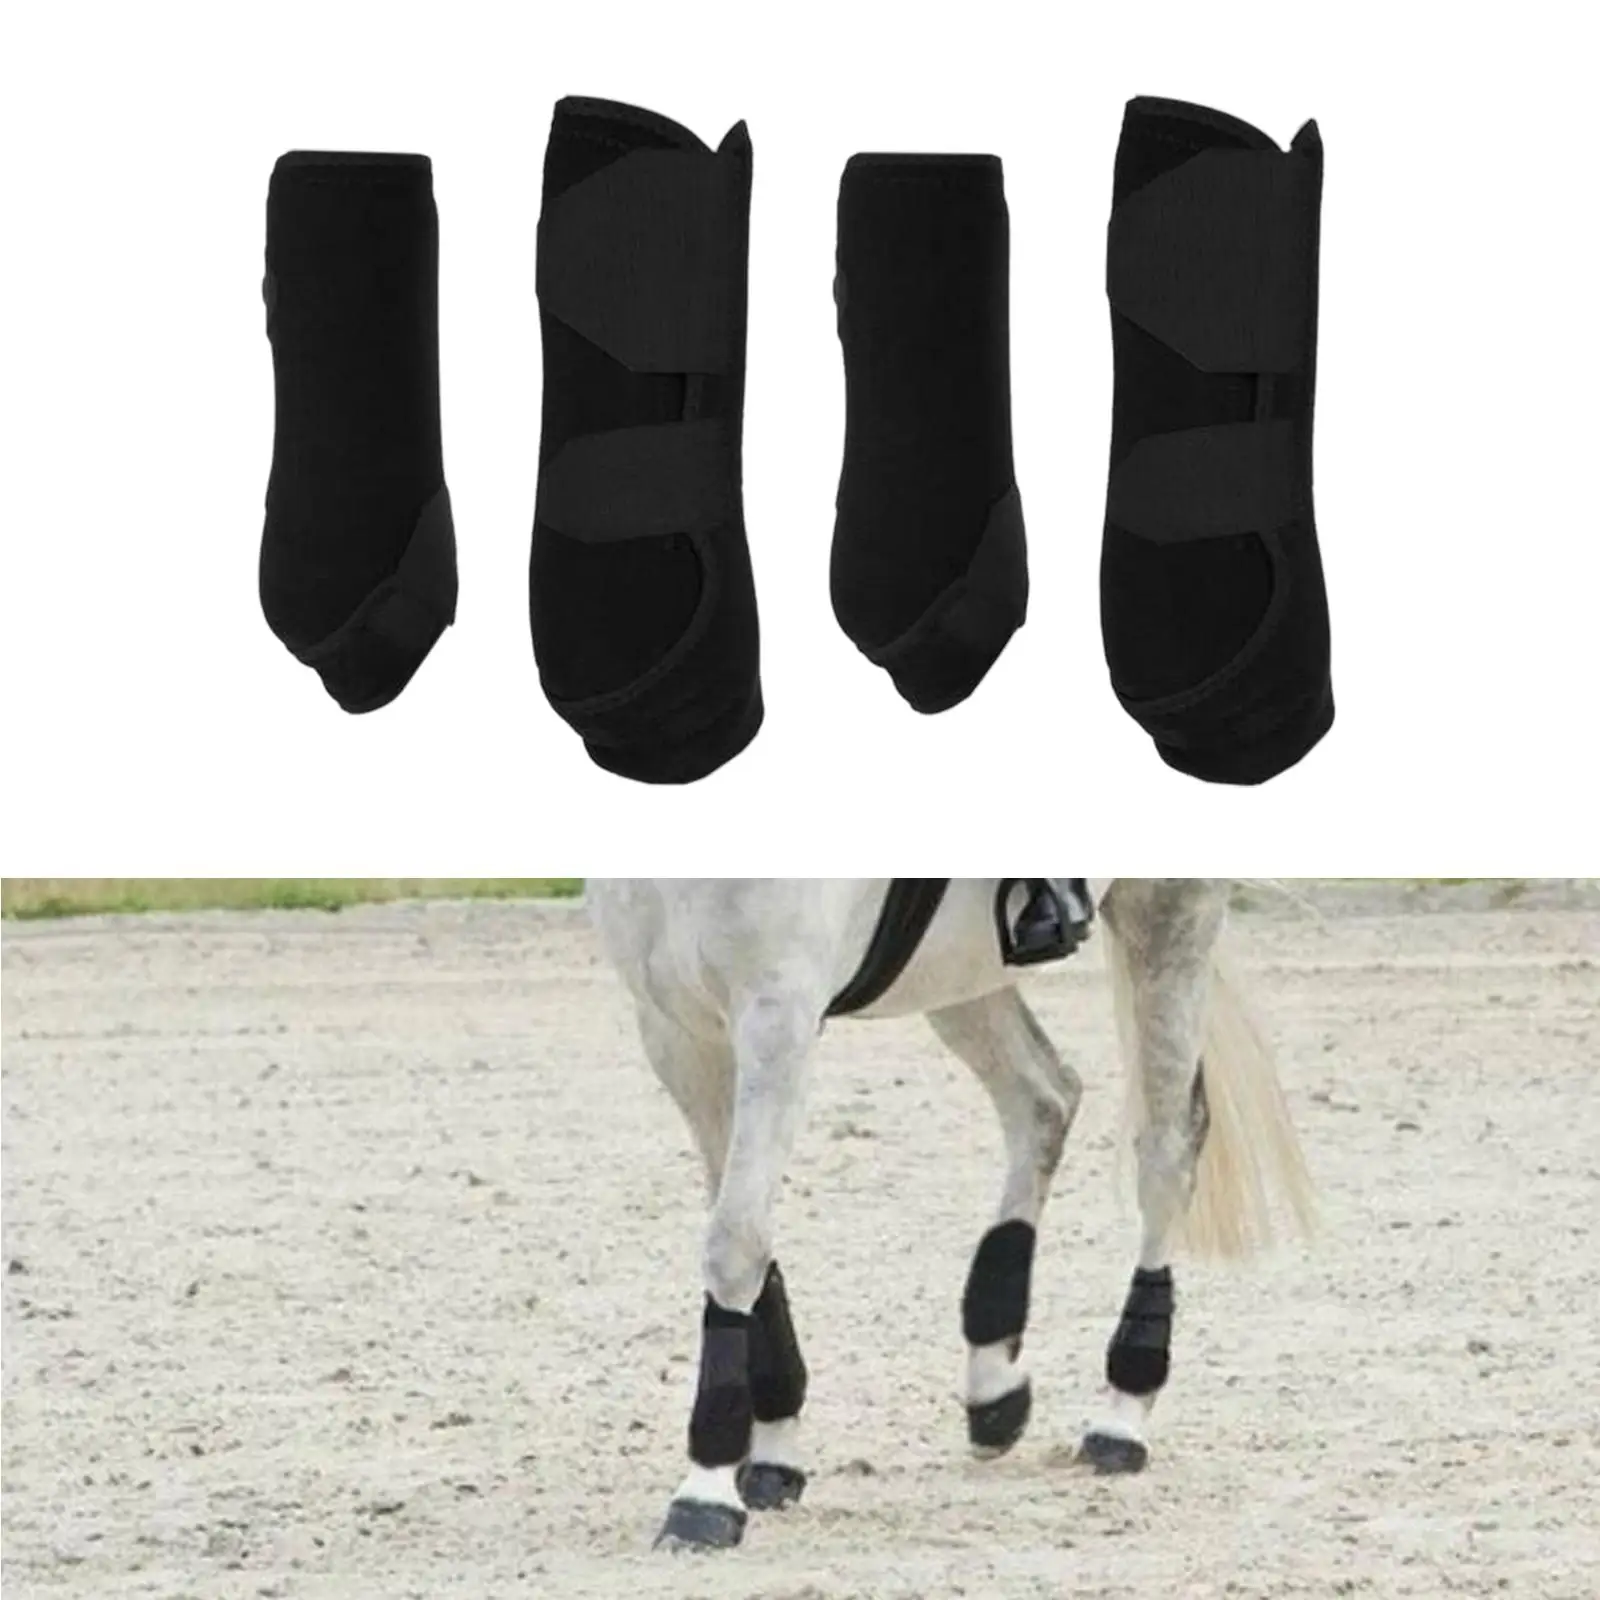 4x Neoprene Horse Boots Leg Wraps Shockproof Protector Tendon Protection Leg Guard for Jumping Riding Equestrian Accessories